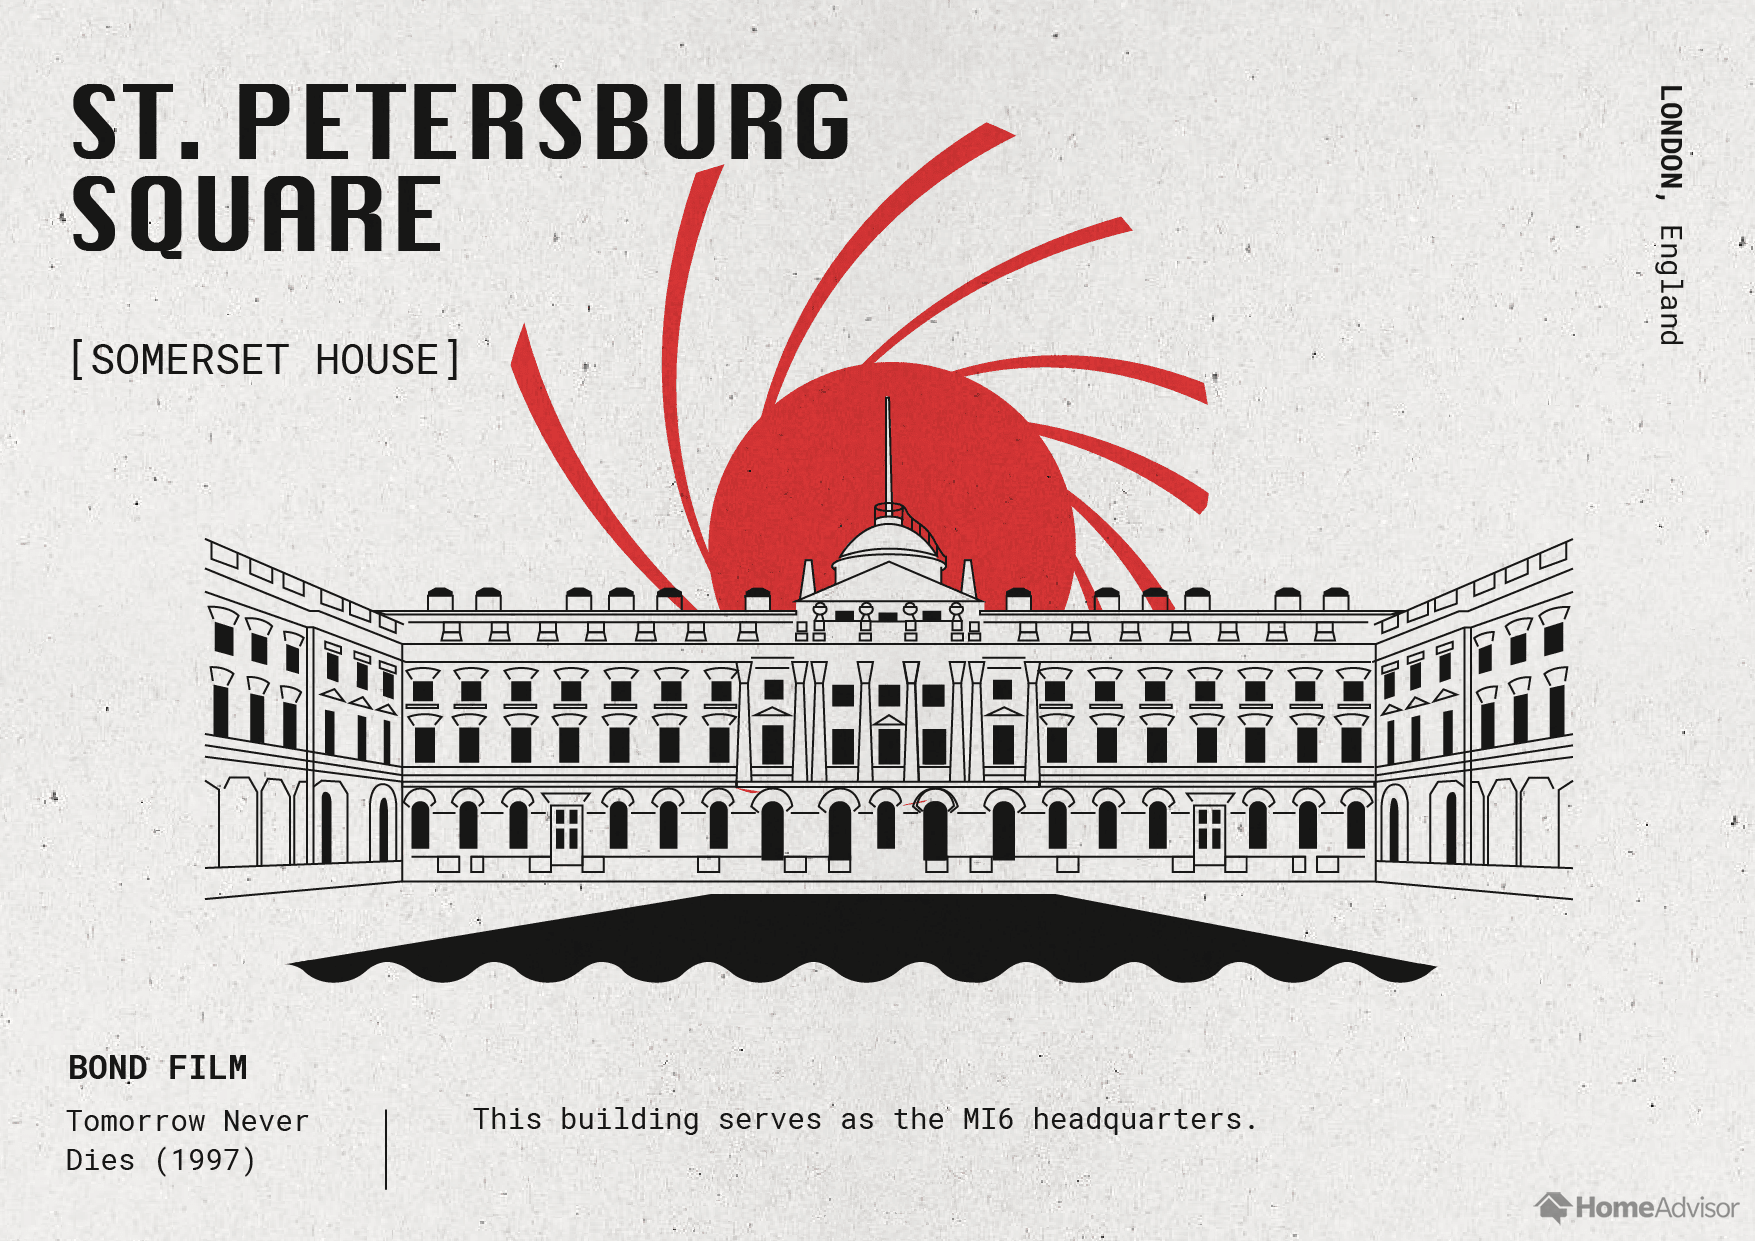 27_The-Architecture-of-James-Bond_St-Petersburg-Square.png